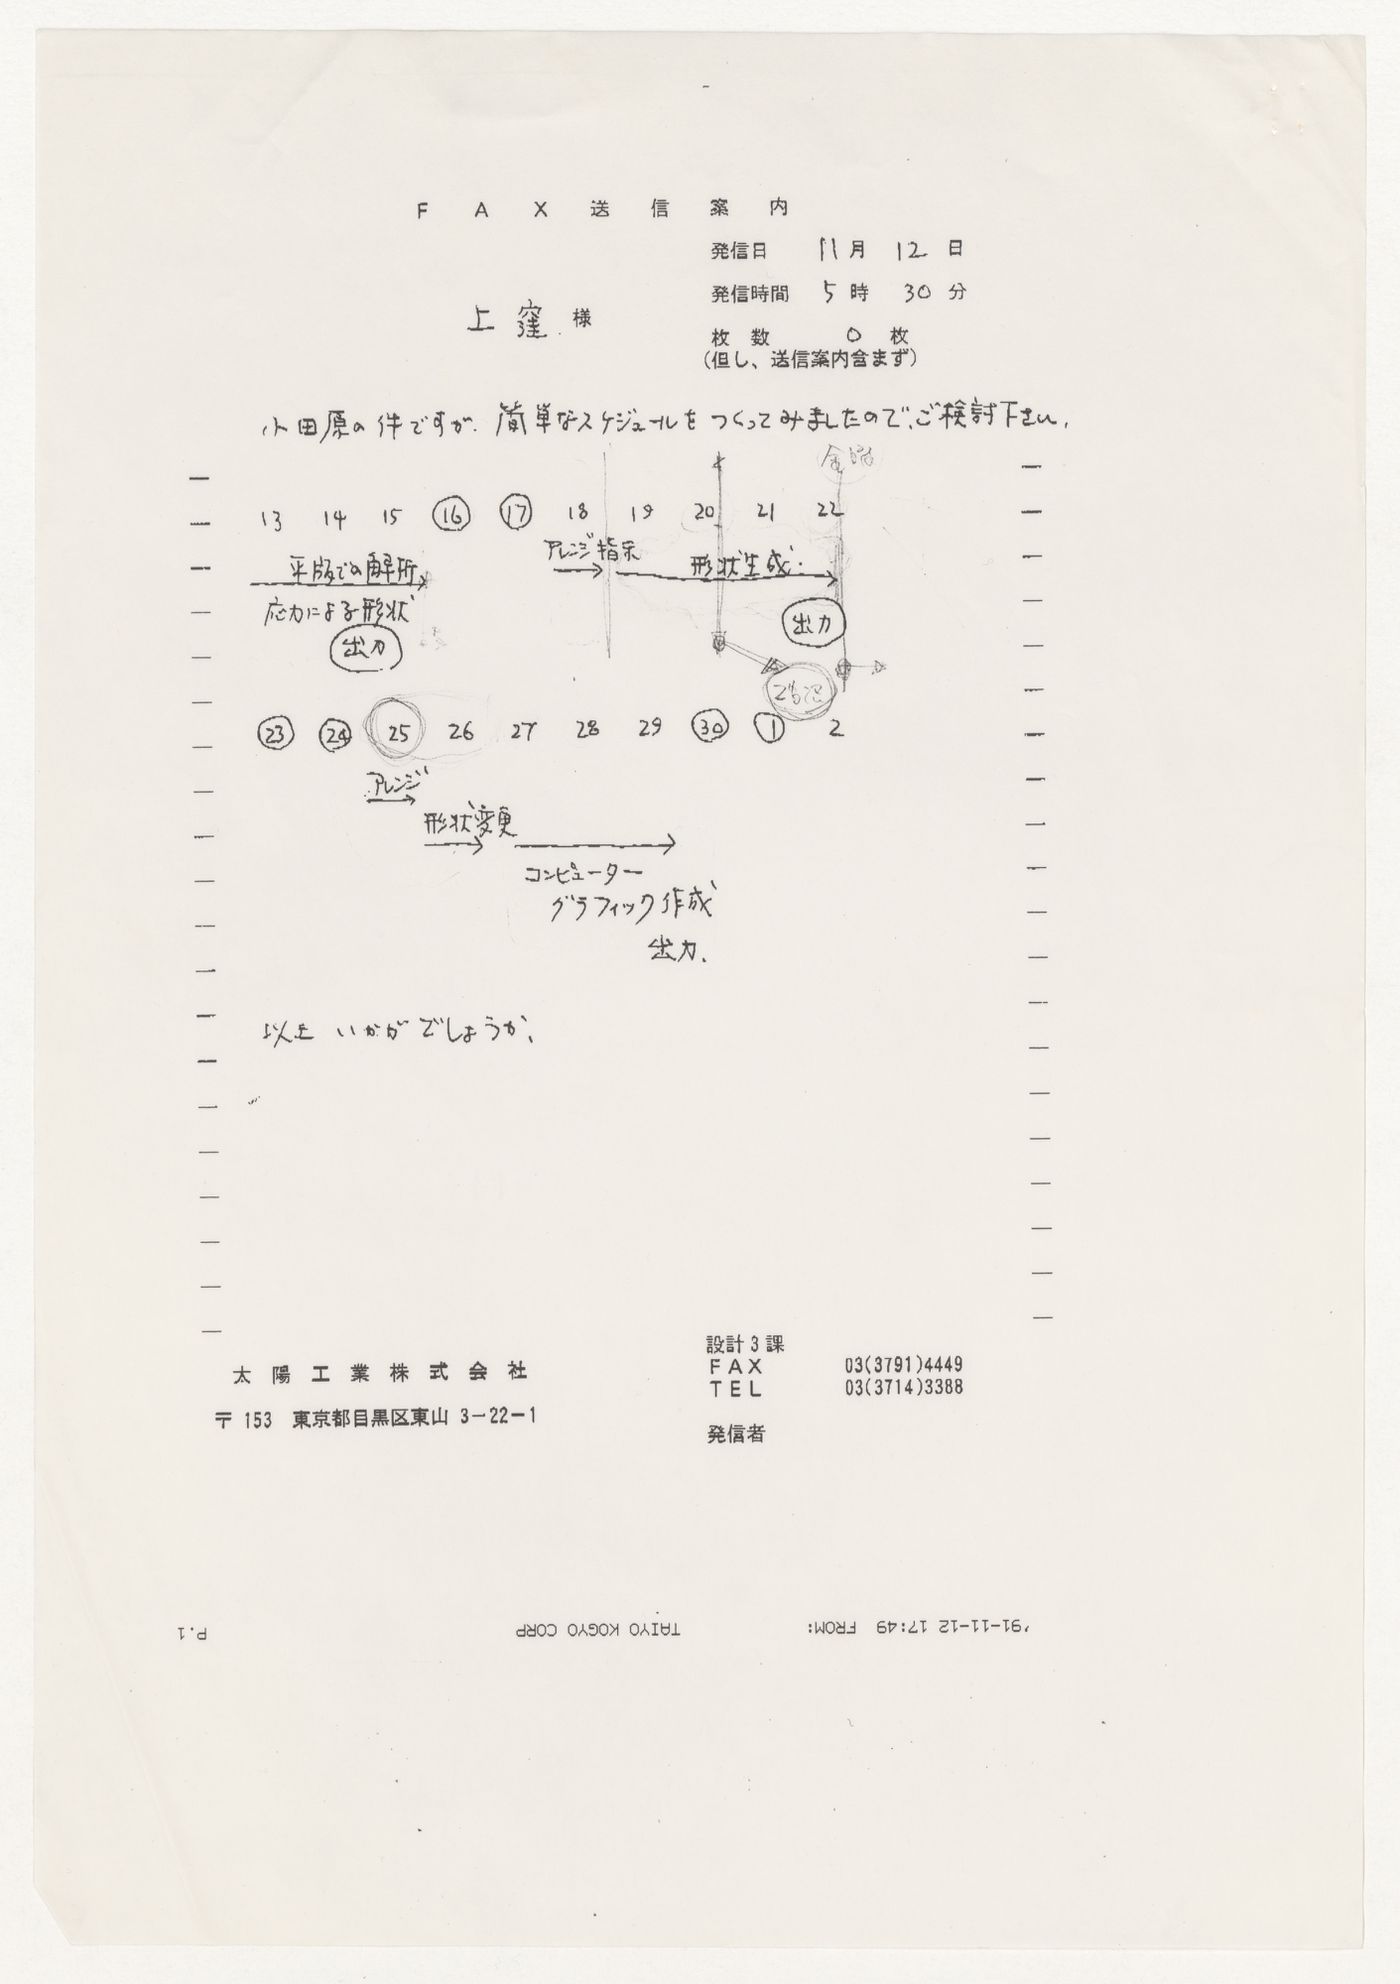 Group of textual records from the project file "Odawara Municipal Sports Complex, Odawara, Japan"